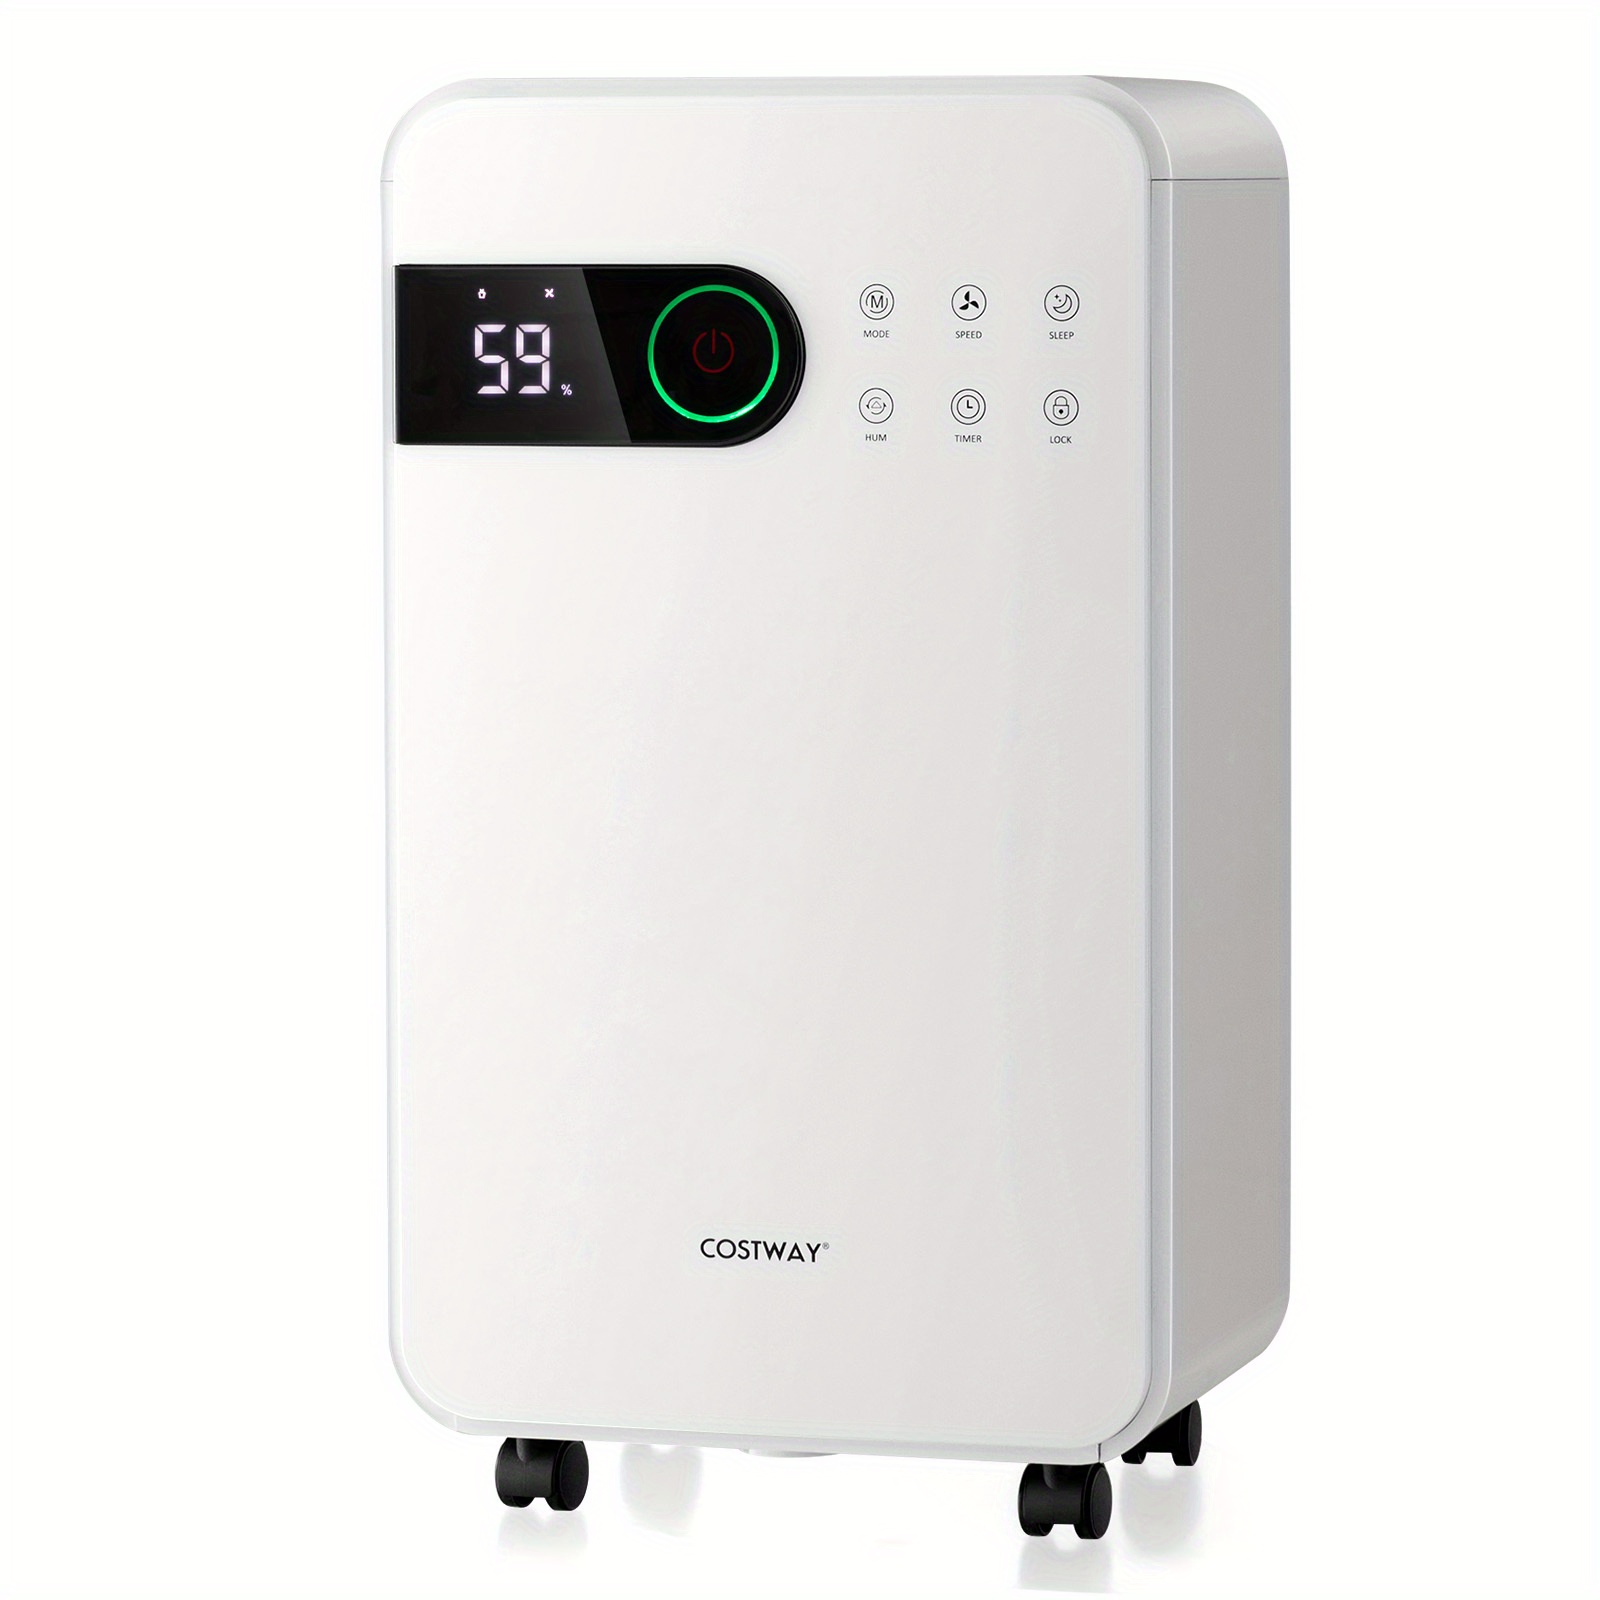 

Lifezeal Dehumidifier For Home Basement Portable 32 Pints W/ Sleep Mode Up To 2500 Sq. Ft